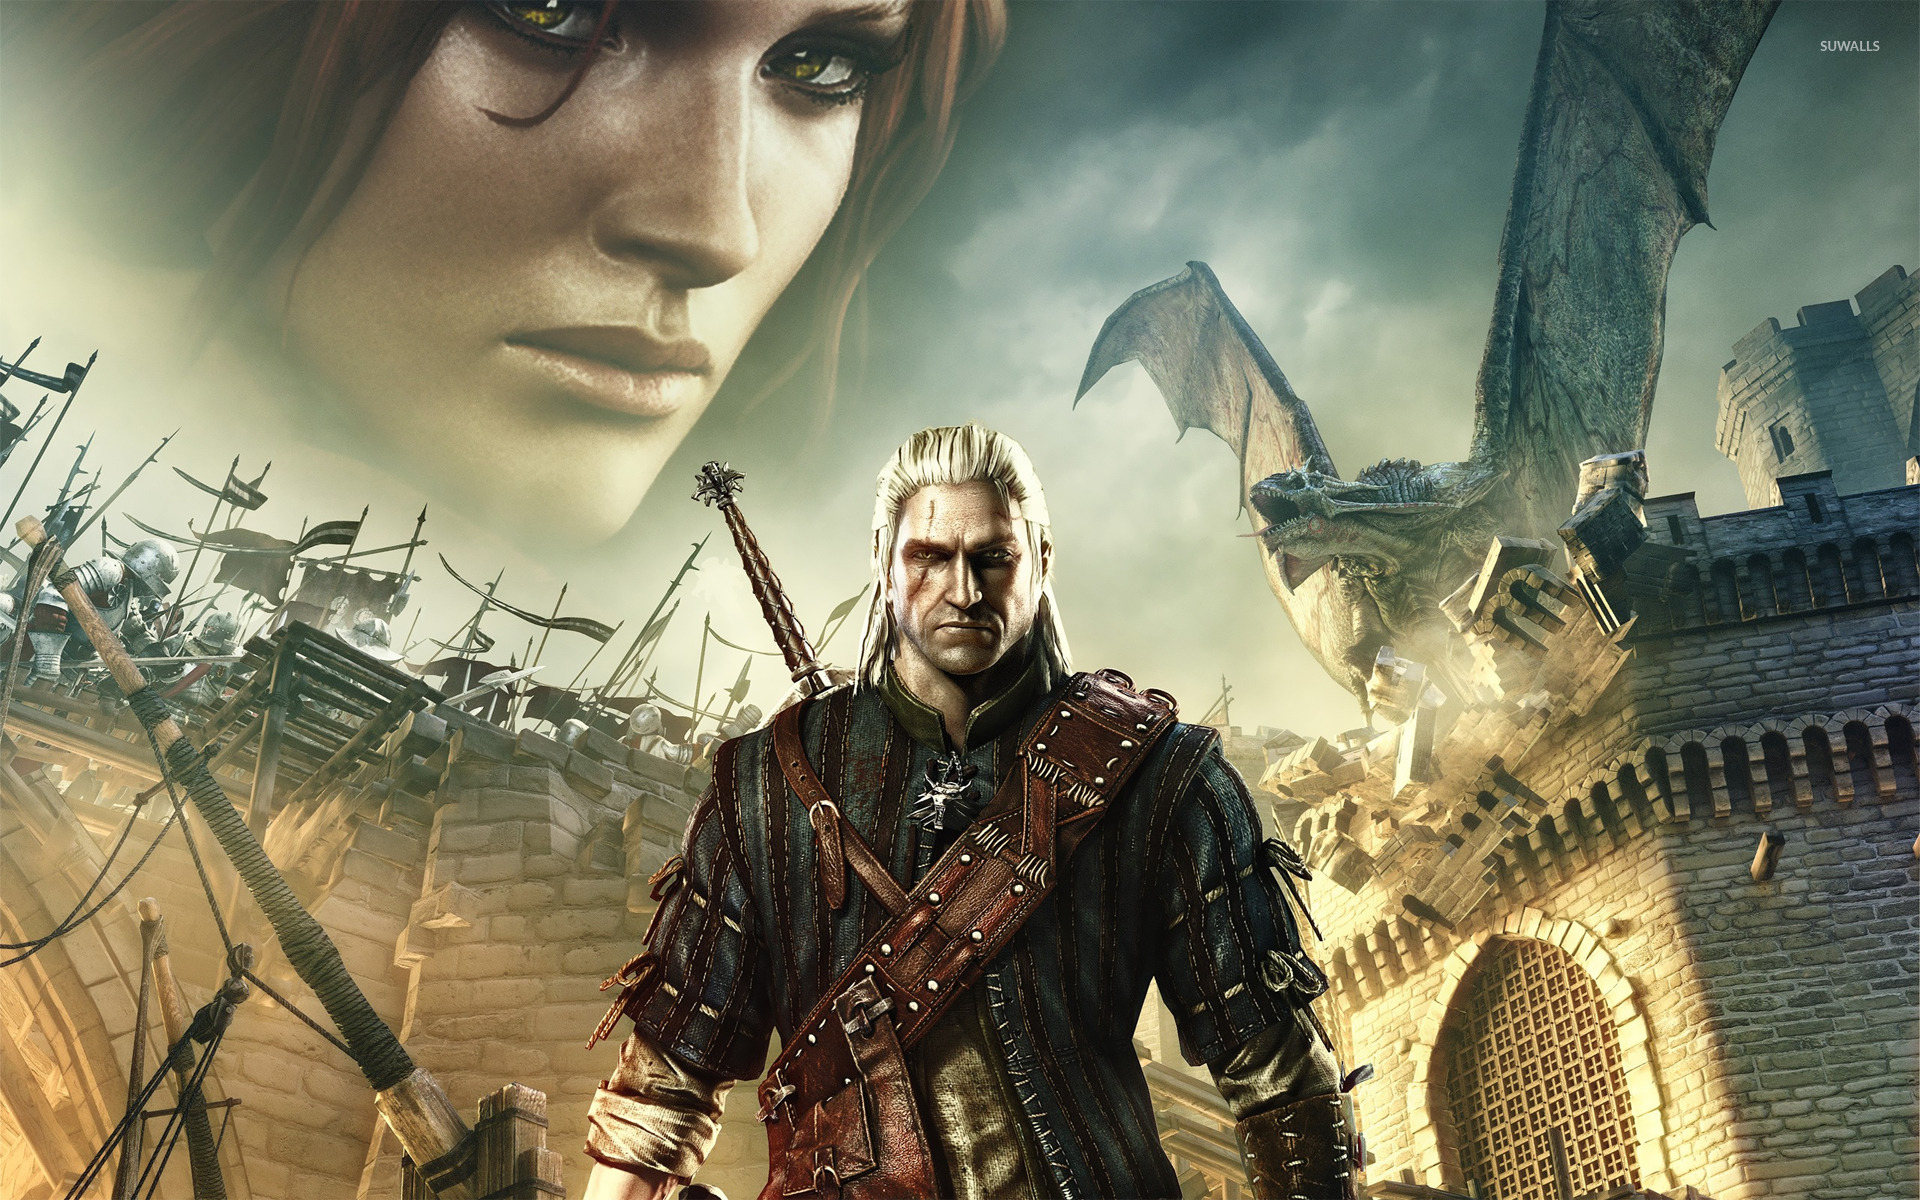 the witcher 2 assassins of kings trailer 1080p